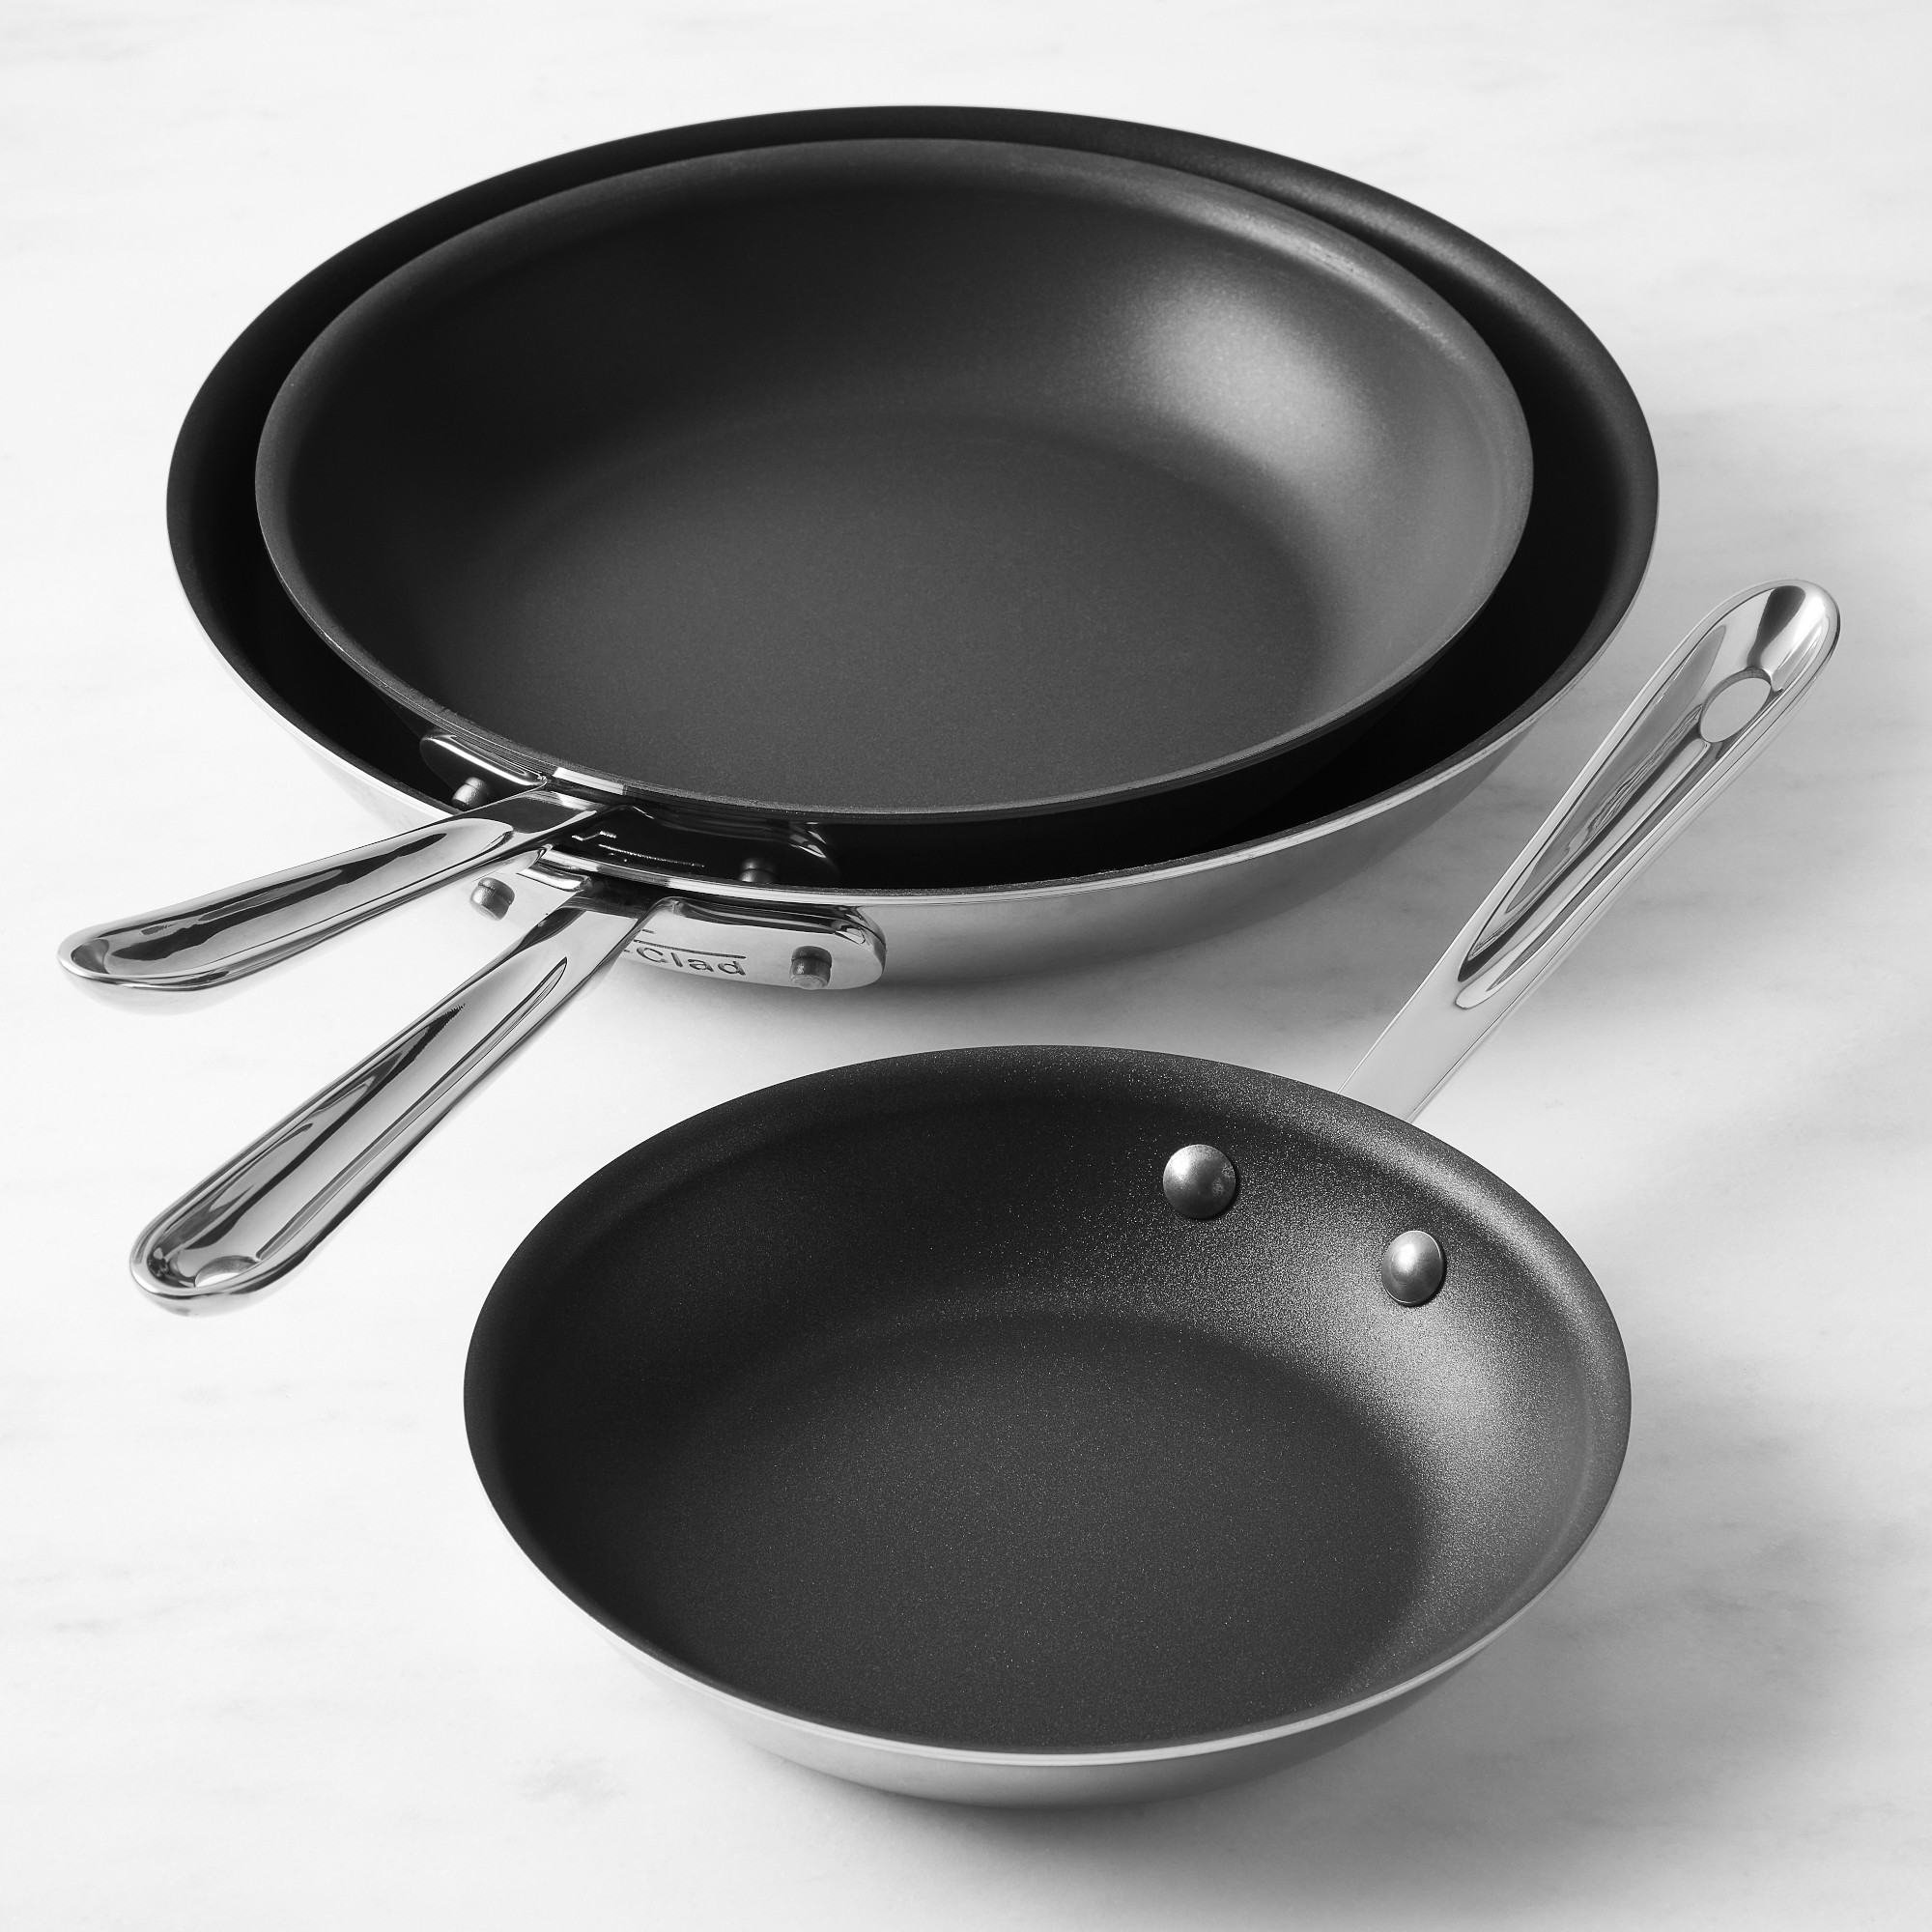 All-Clad D5® Stainless-Steel Nonstick 3-Piece Fry Pan Set